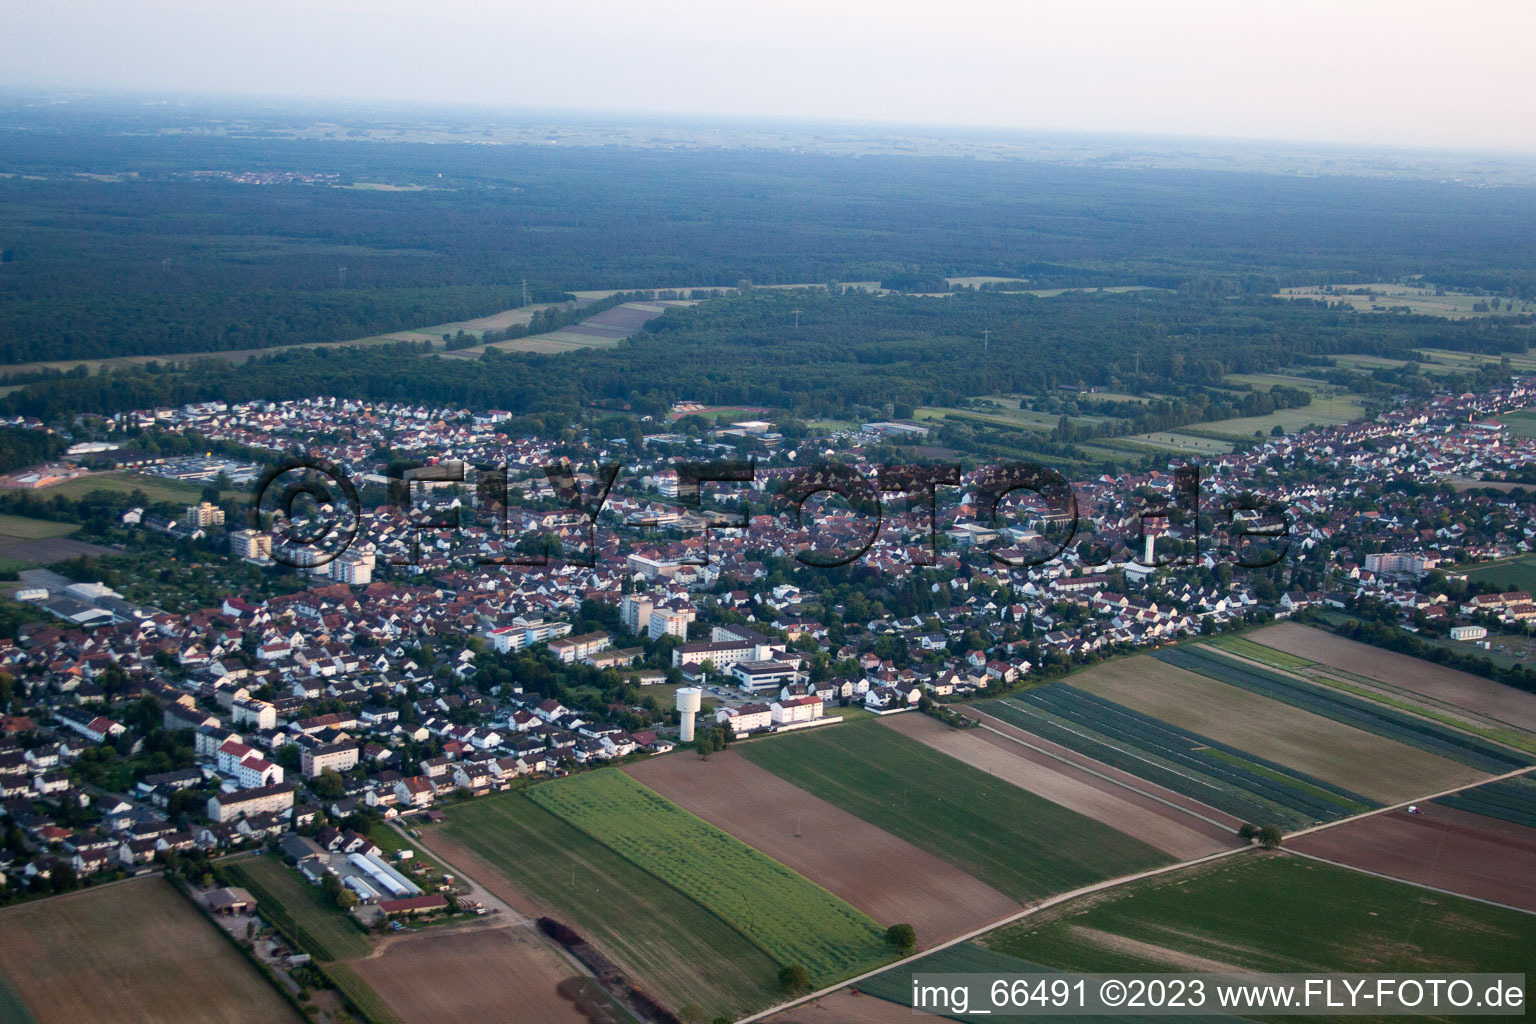 Aerial view of From the northeast in Kandel in the state Rhineland-Palatinate, Germany